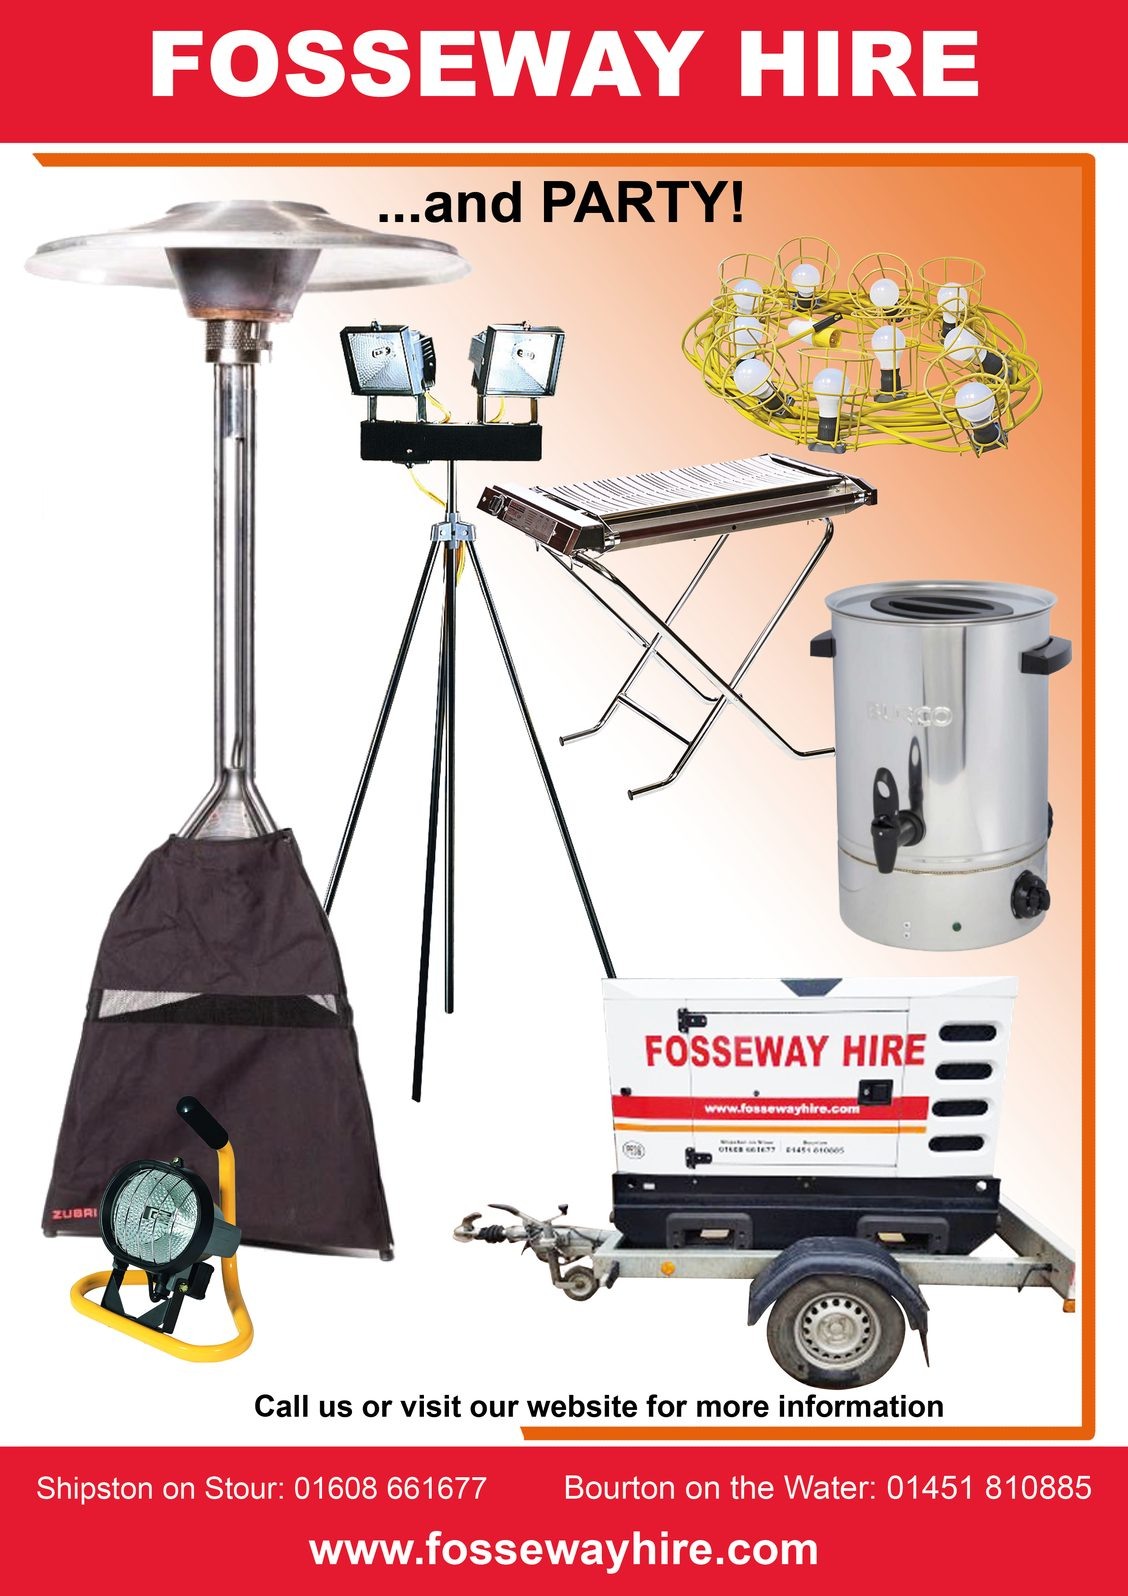 Hire Equipment for an Outside Party